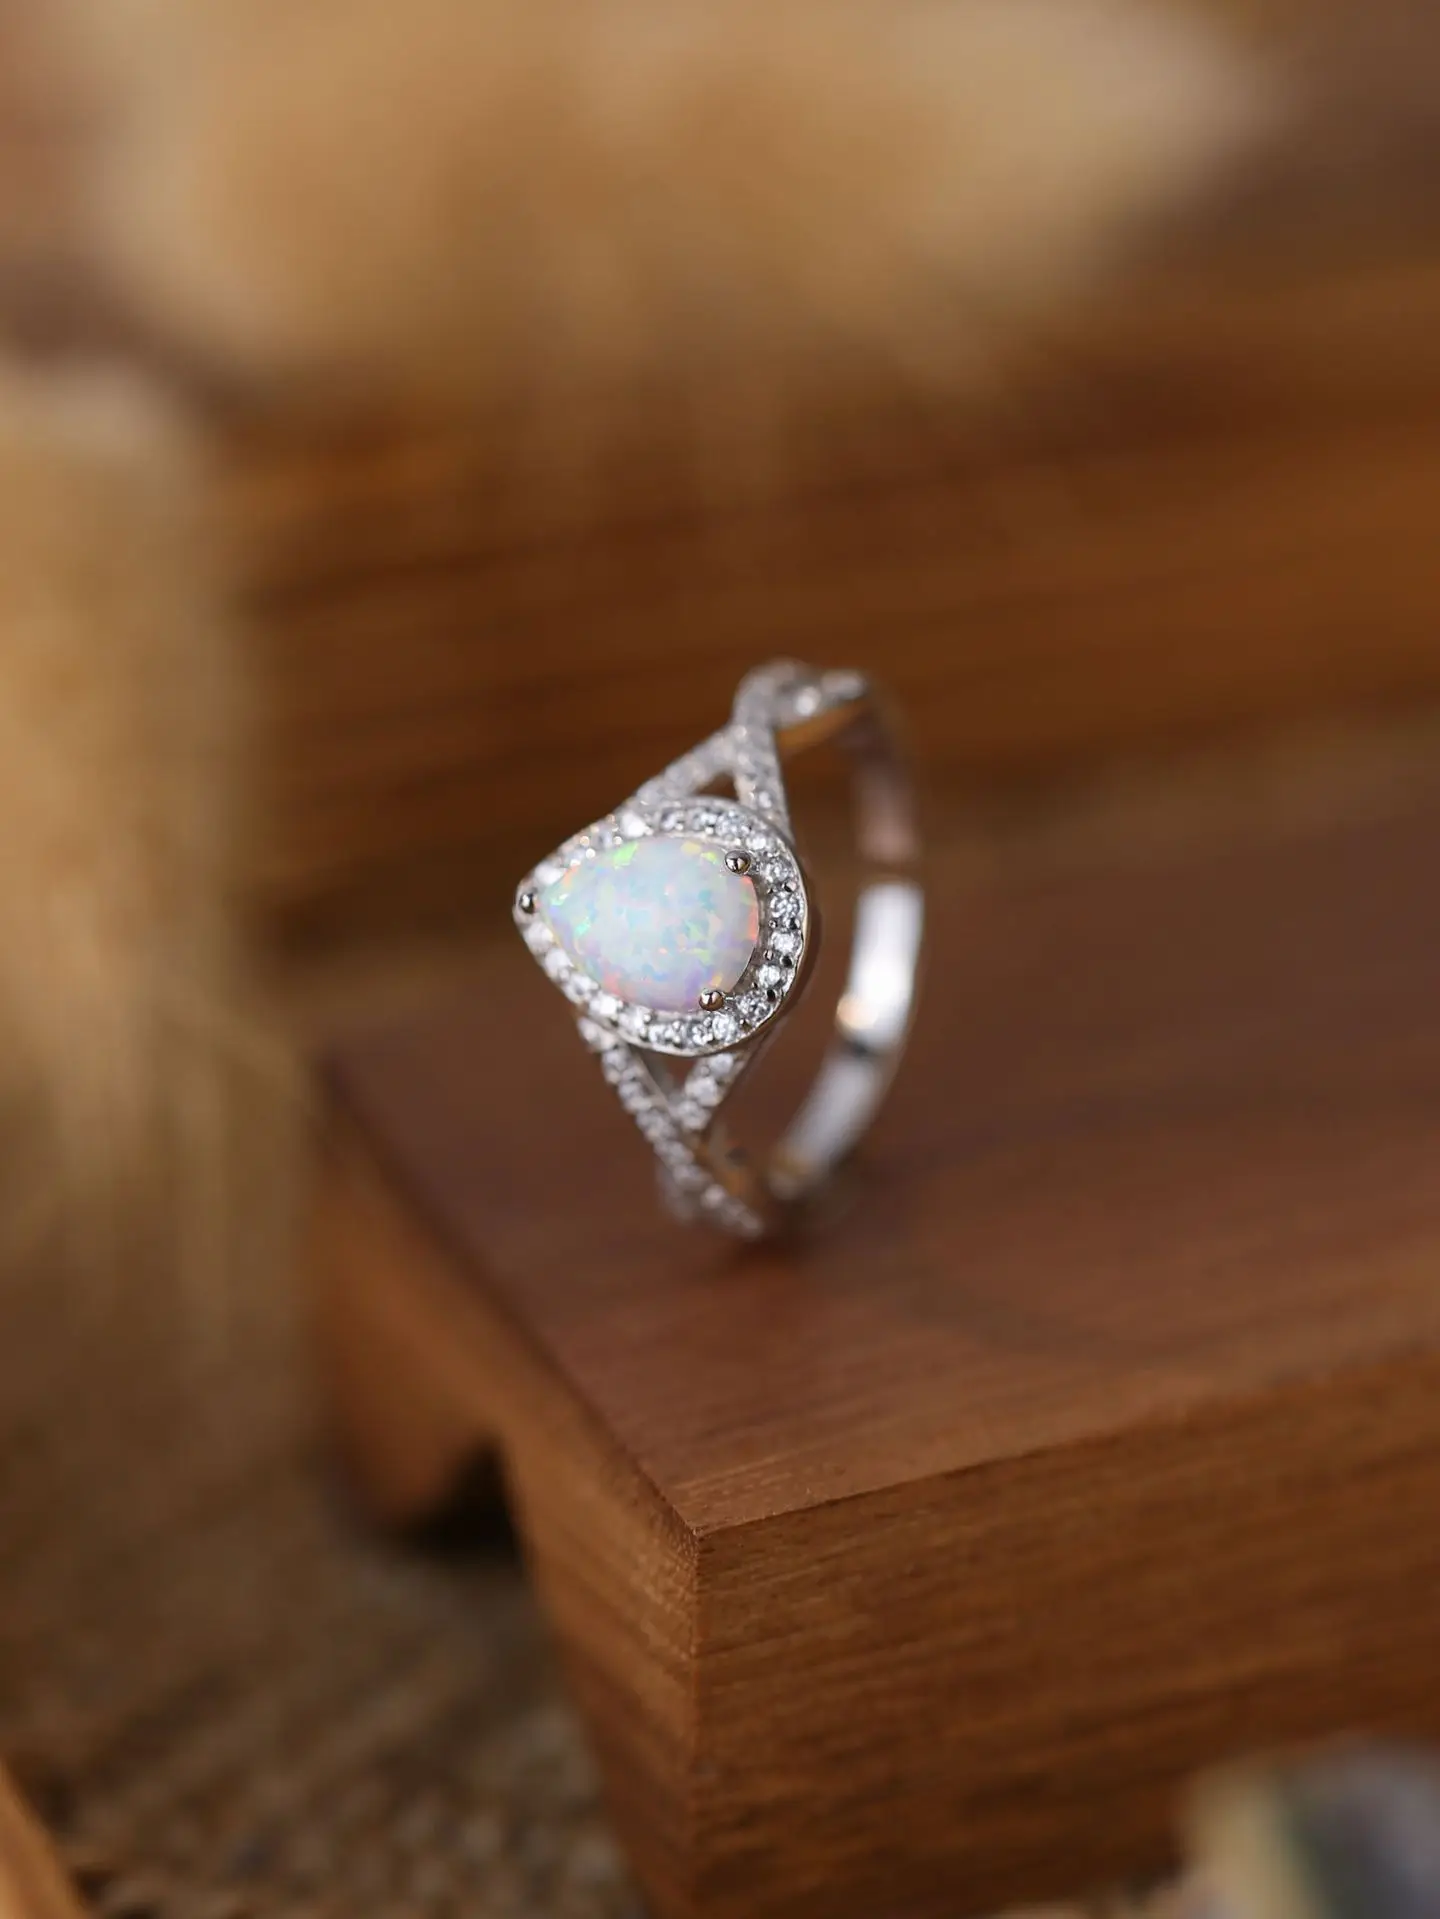 

Women's Pure 925 Silver Ring Inlaid with Zircon and Water Drop Opal with Sweet Style for Attending Wedding Wearing